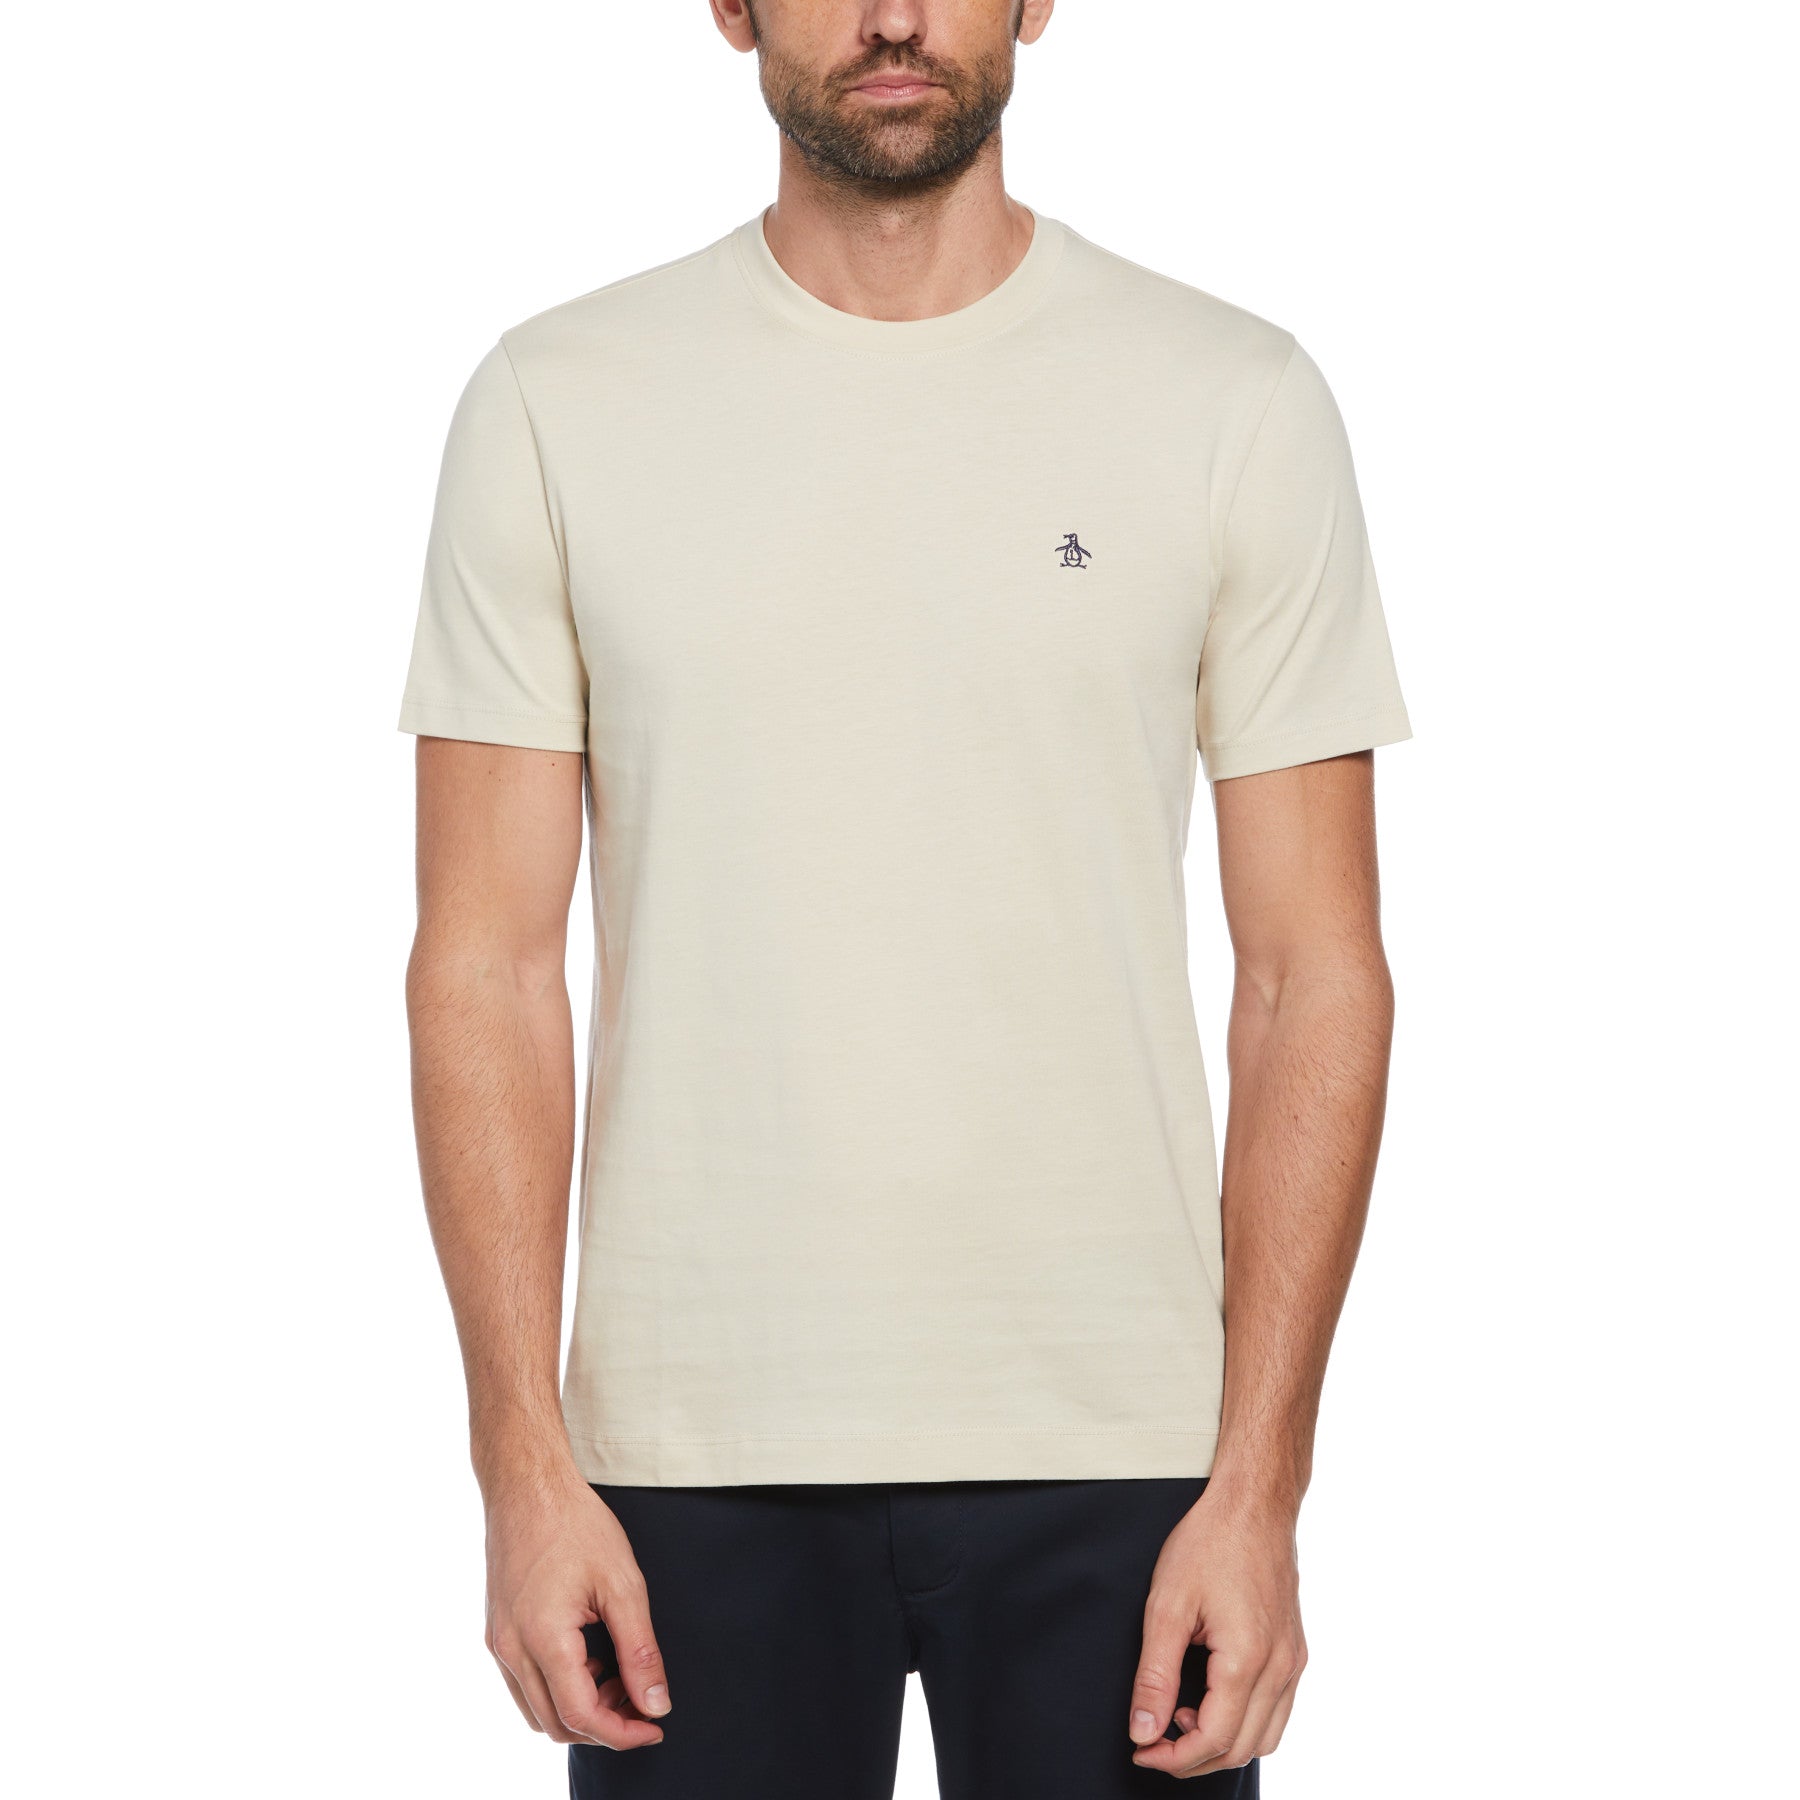 View Pin Point Embroidered Logo Organic Cotton TShirt In Oatmeal information